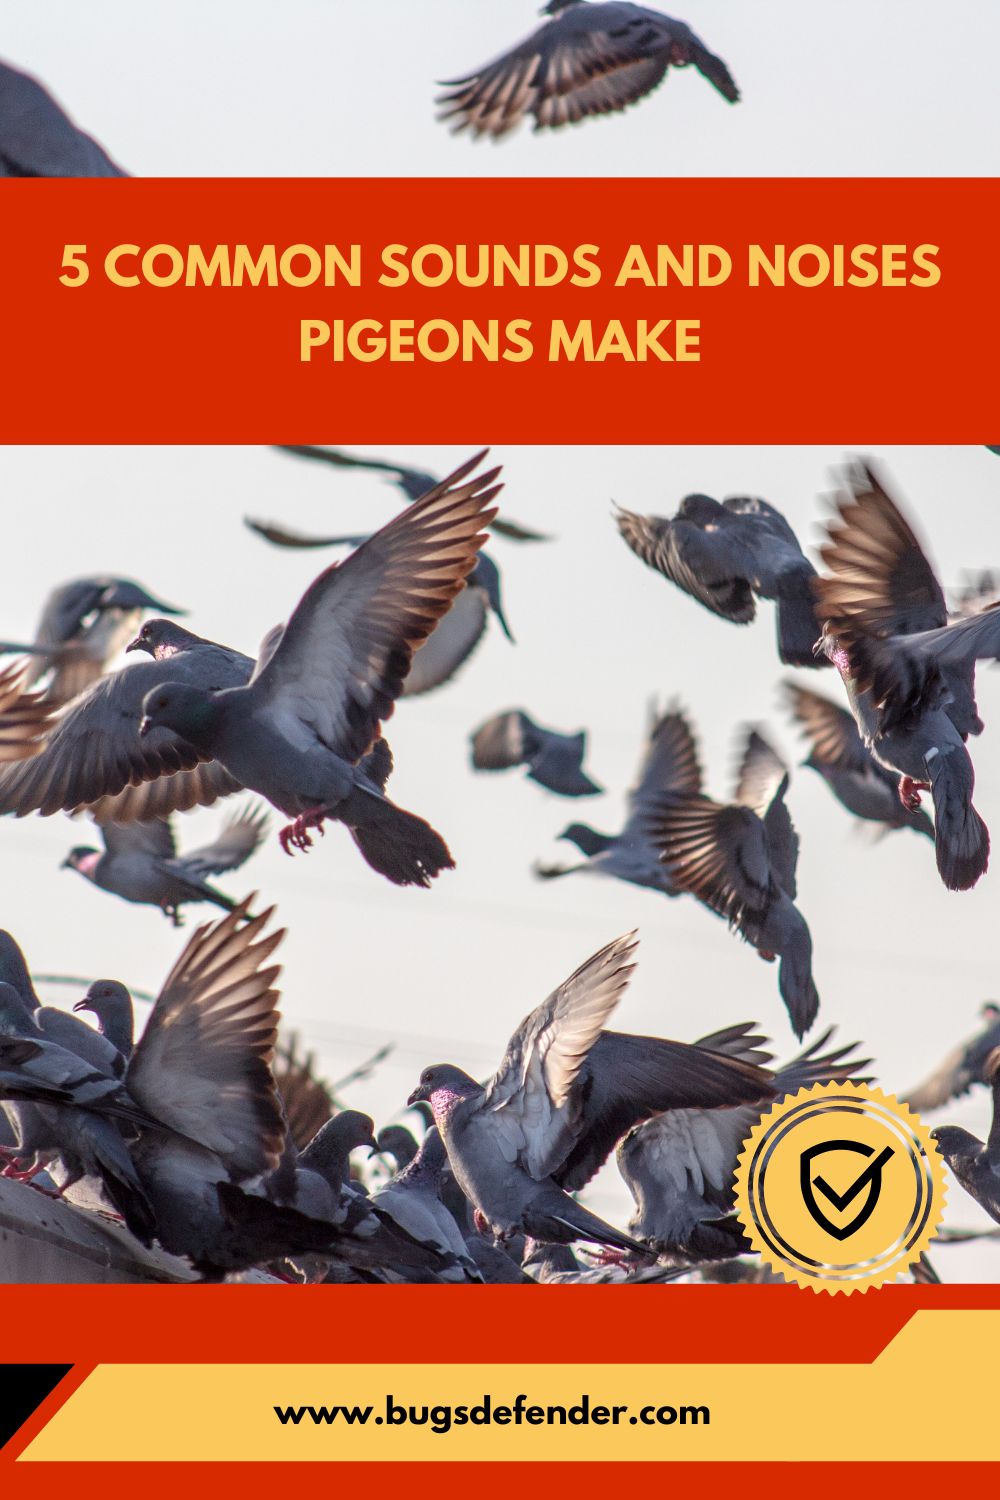 5 Common Sounds and noises pigeons make pin2